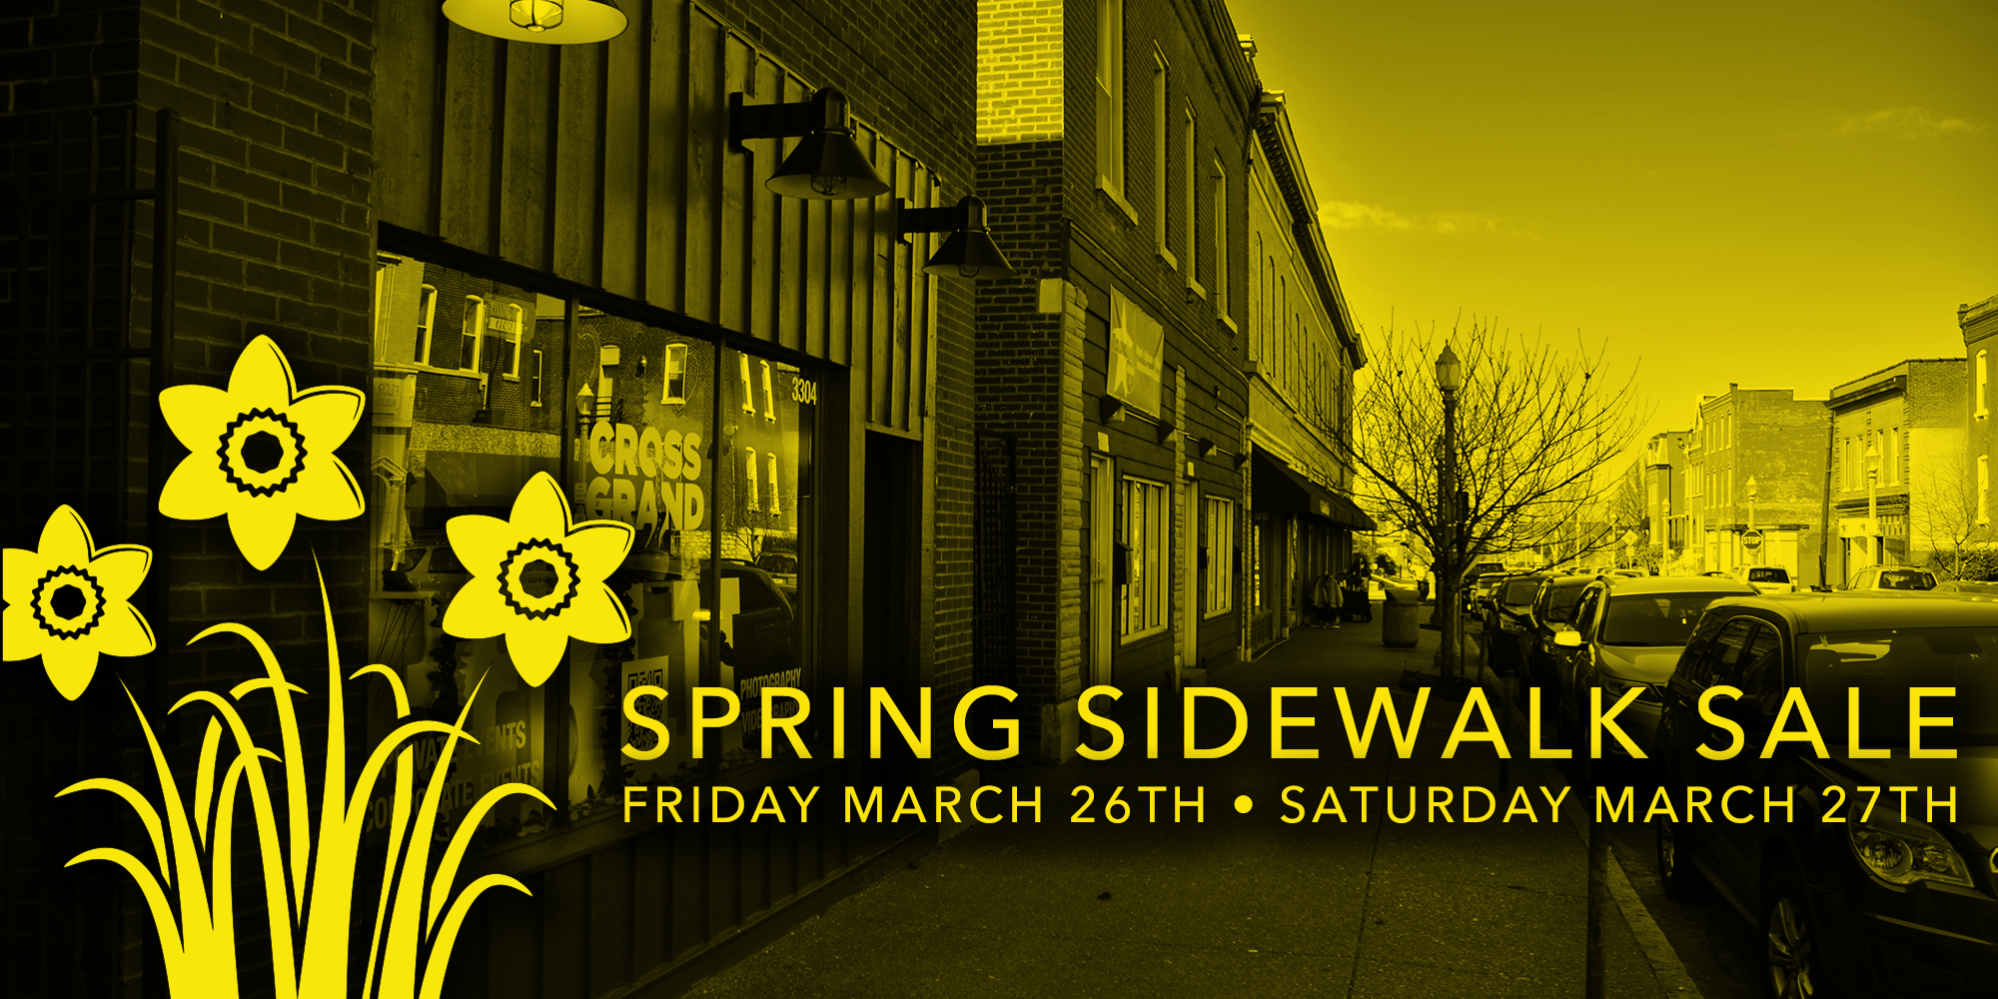 Spring Sidewalk Sale in Downtown Dutchtown, Friday March 26th and Saturday March 27th.